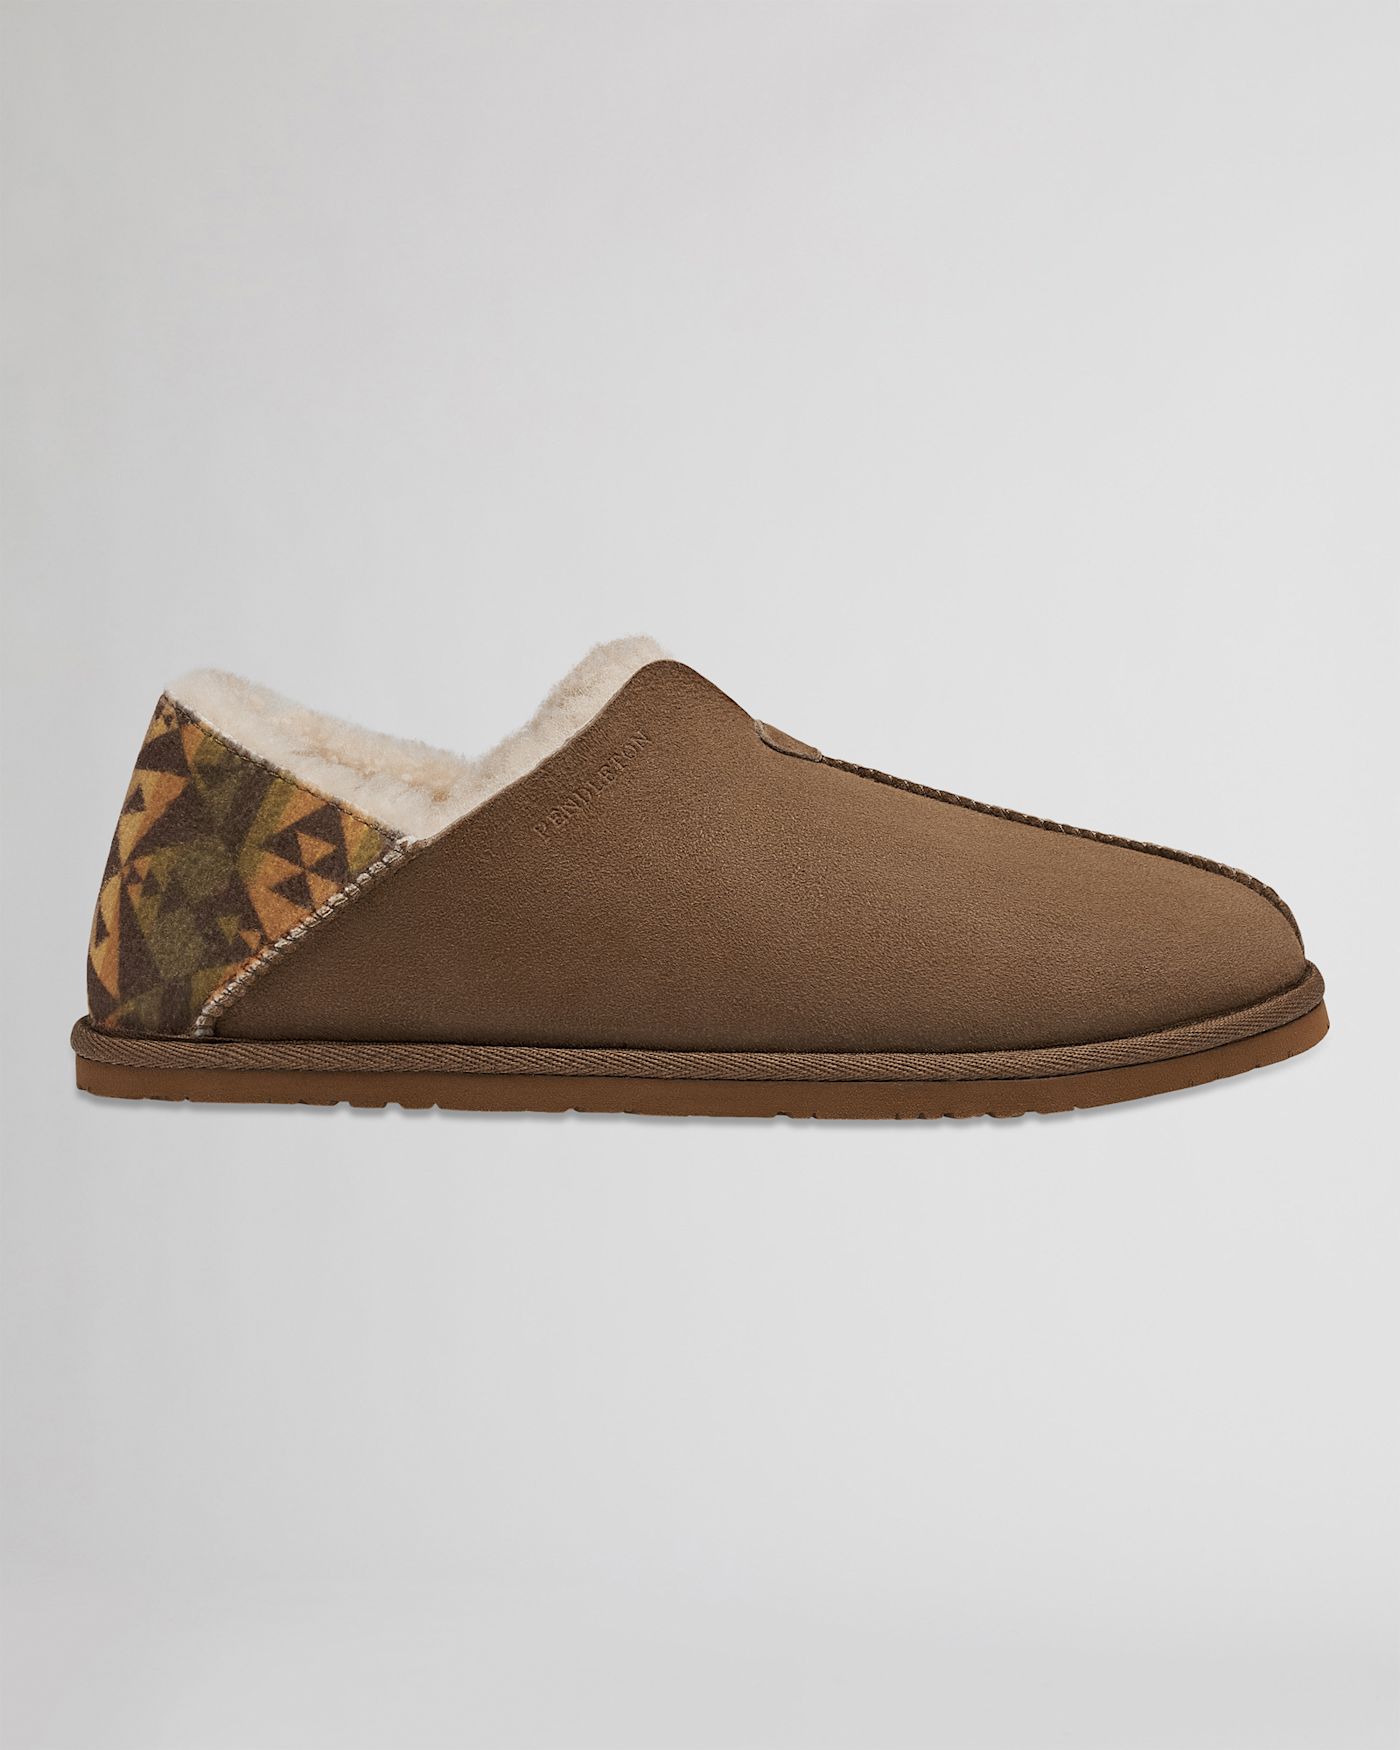 MEN'S COUCH CRUISER SLIPPERS